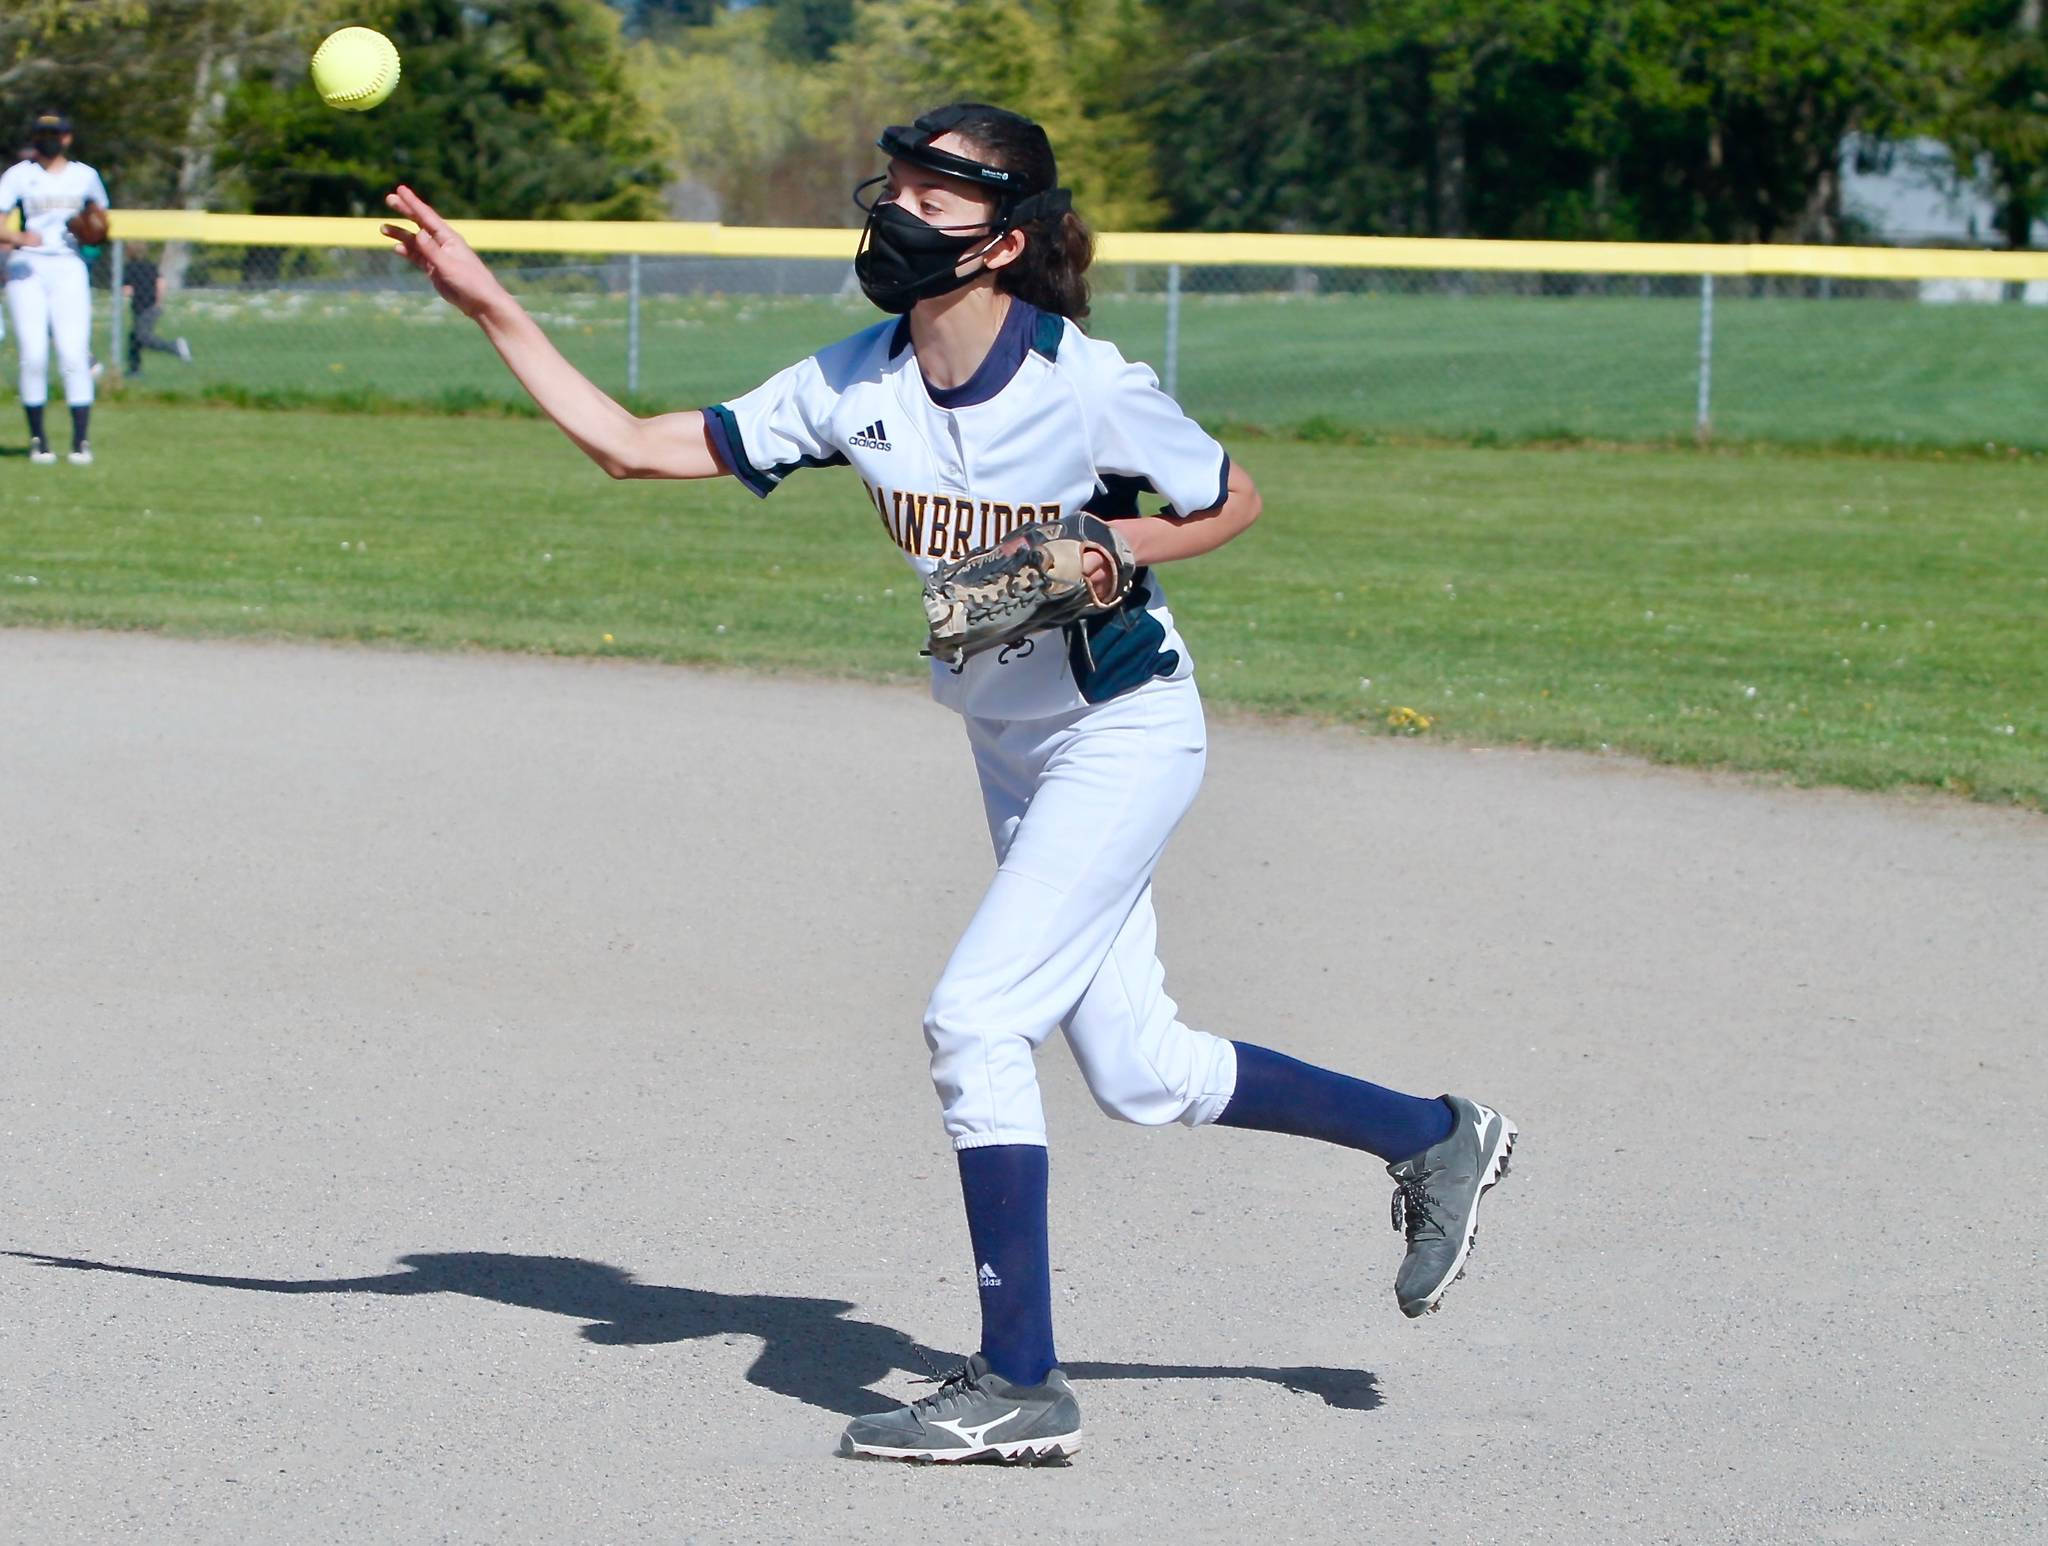 Kate Wikstrom makes the play on a ground ball at second base against Olympic. (Mark Krulish/Kitsap News Group)